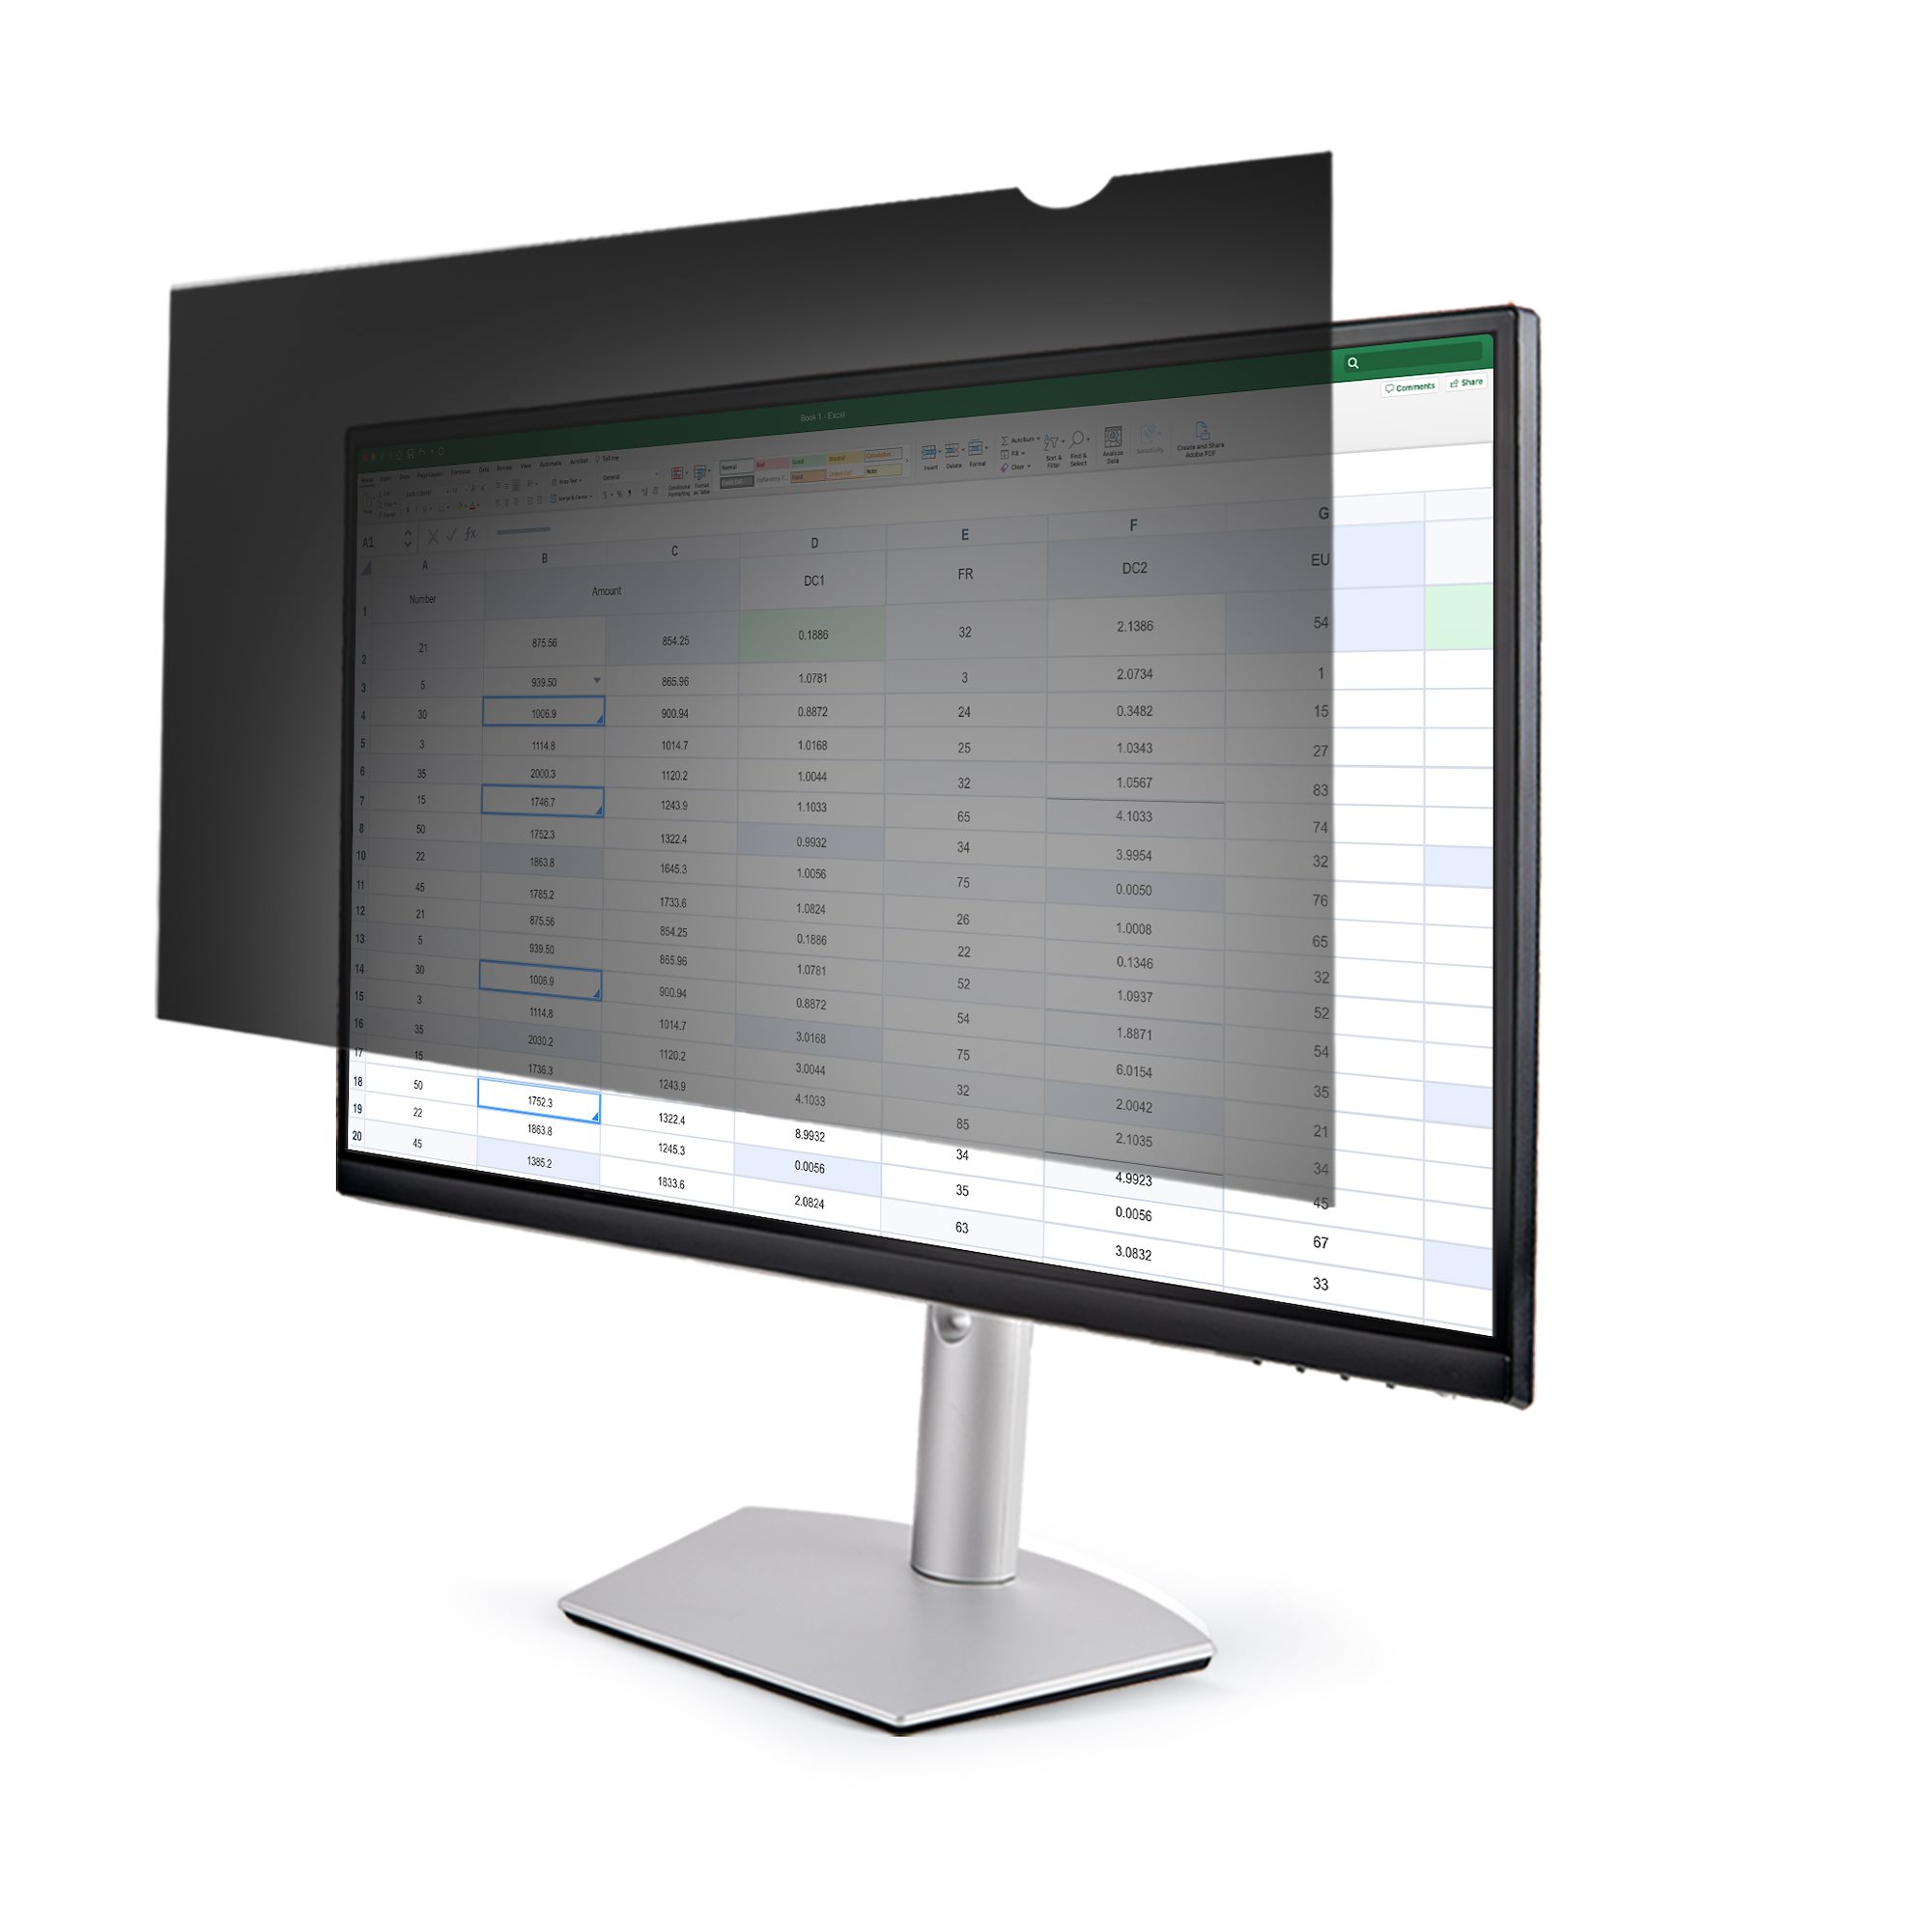 【PRIVACY-SCREEN-24MB】24IN. MONITOR PRIVACY SCREEN